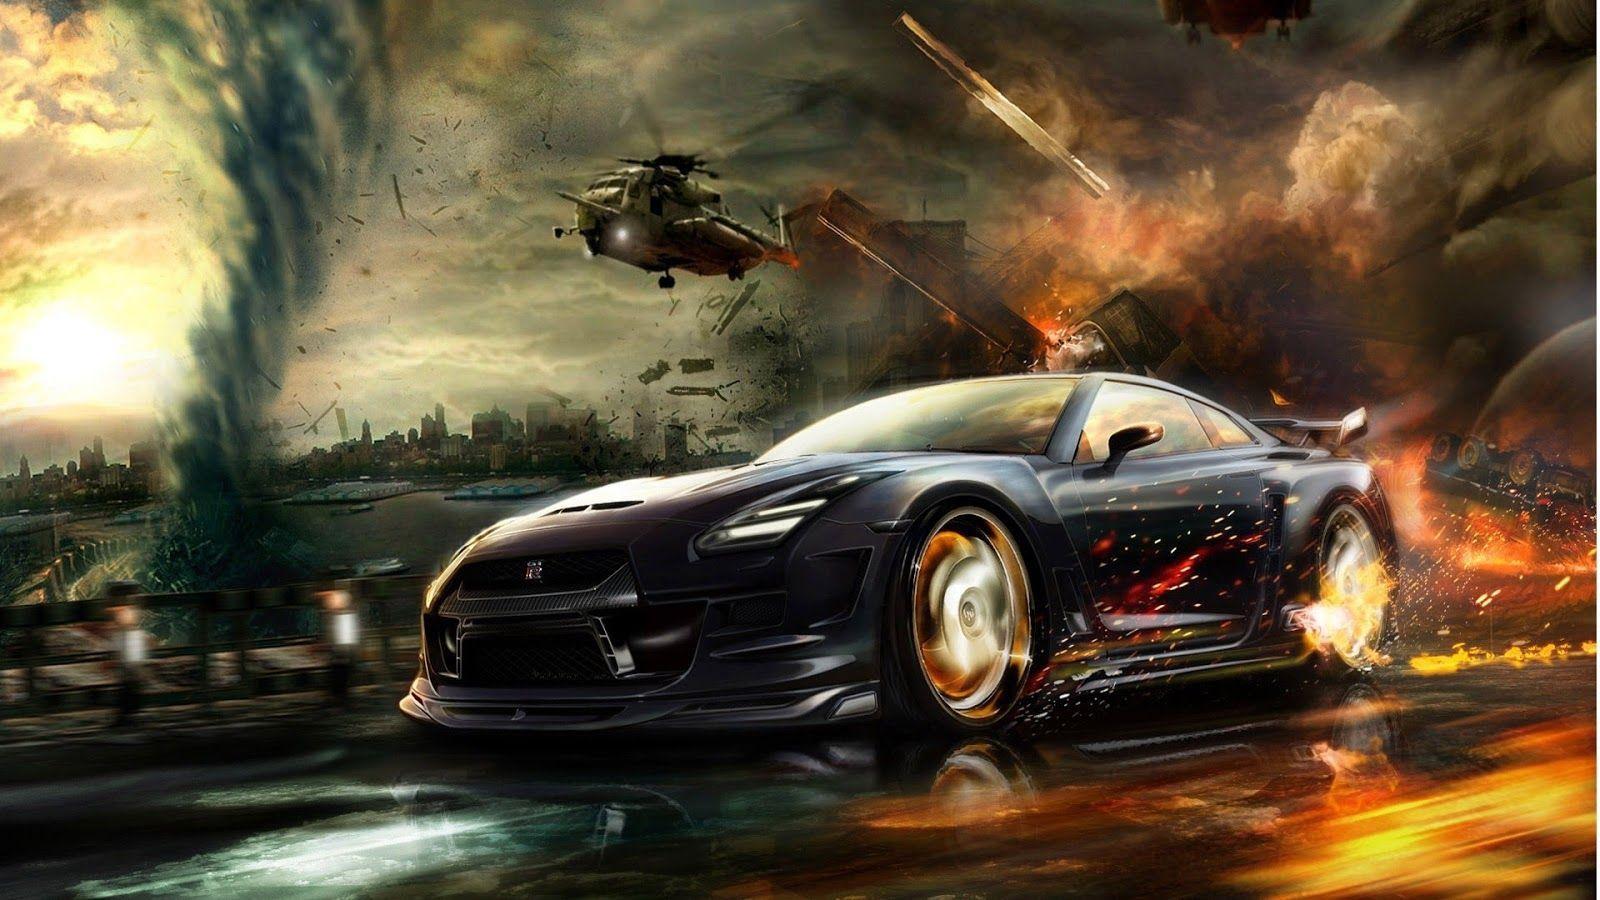 cool car games Search Engine